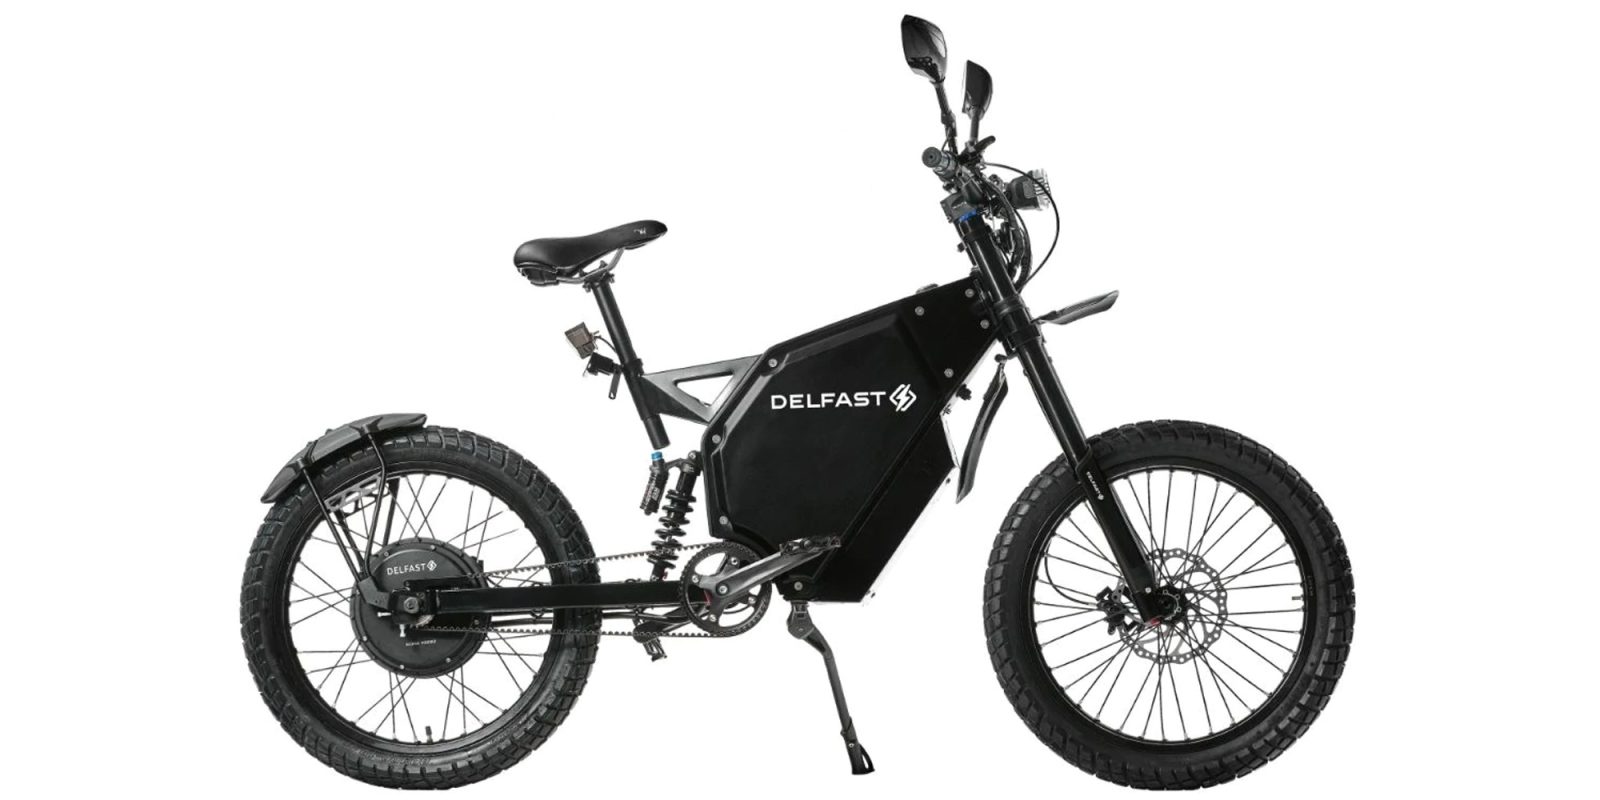 Ride for 200 miles per charge on Delfast’s electric dirt bike at $100 off, more in New Green Deals